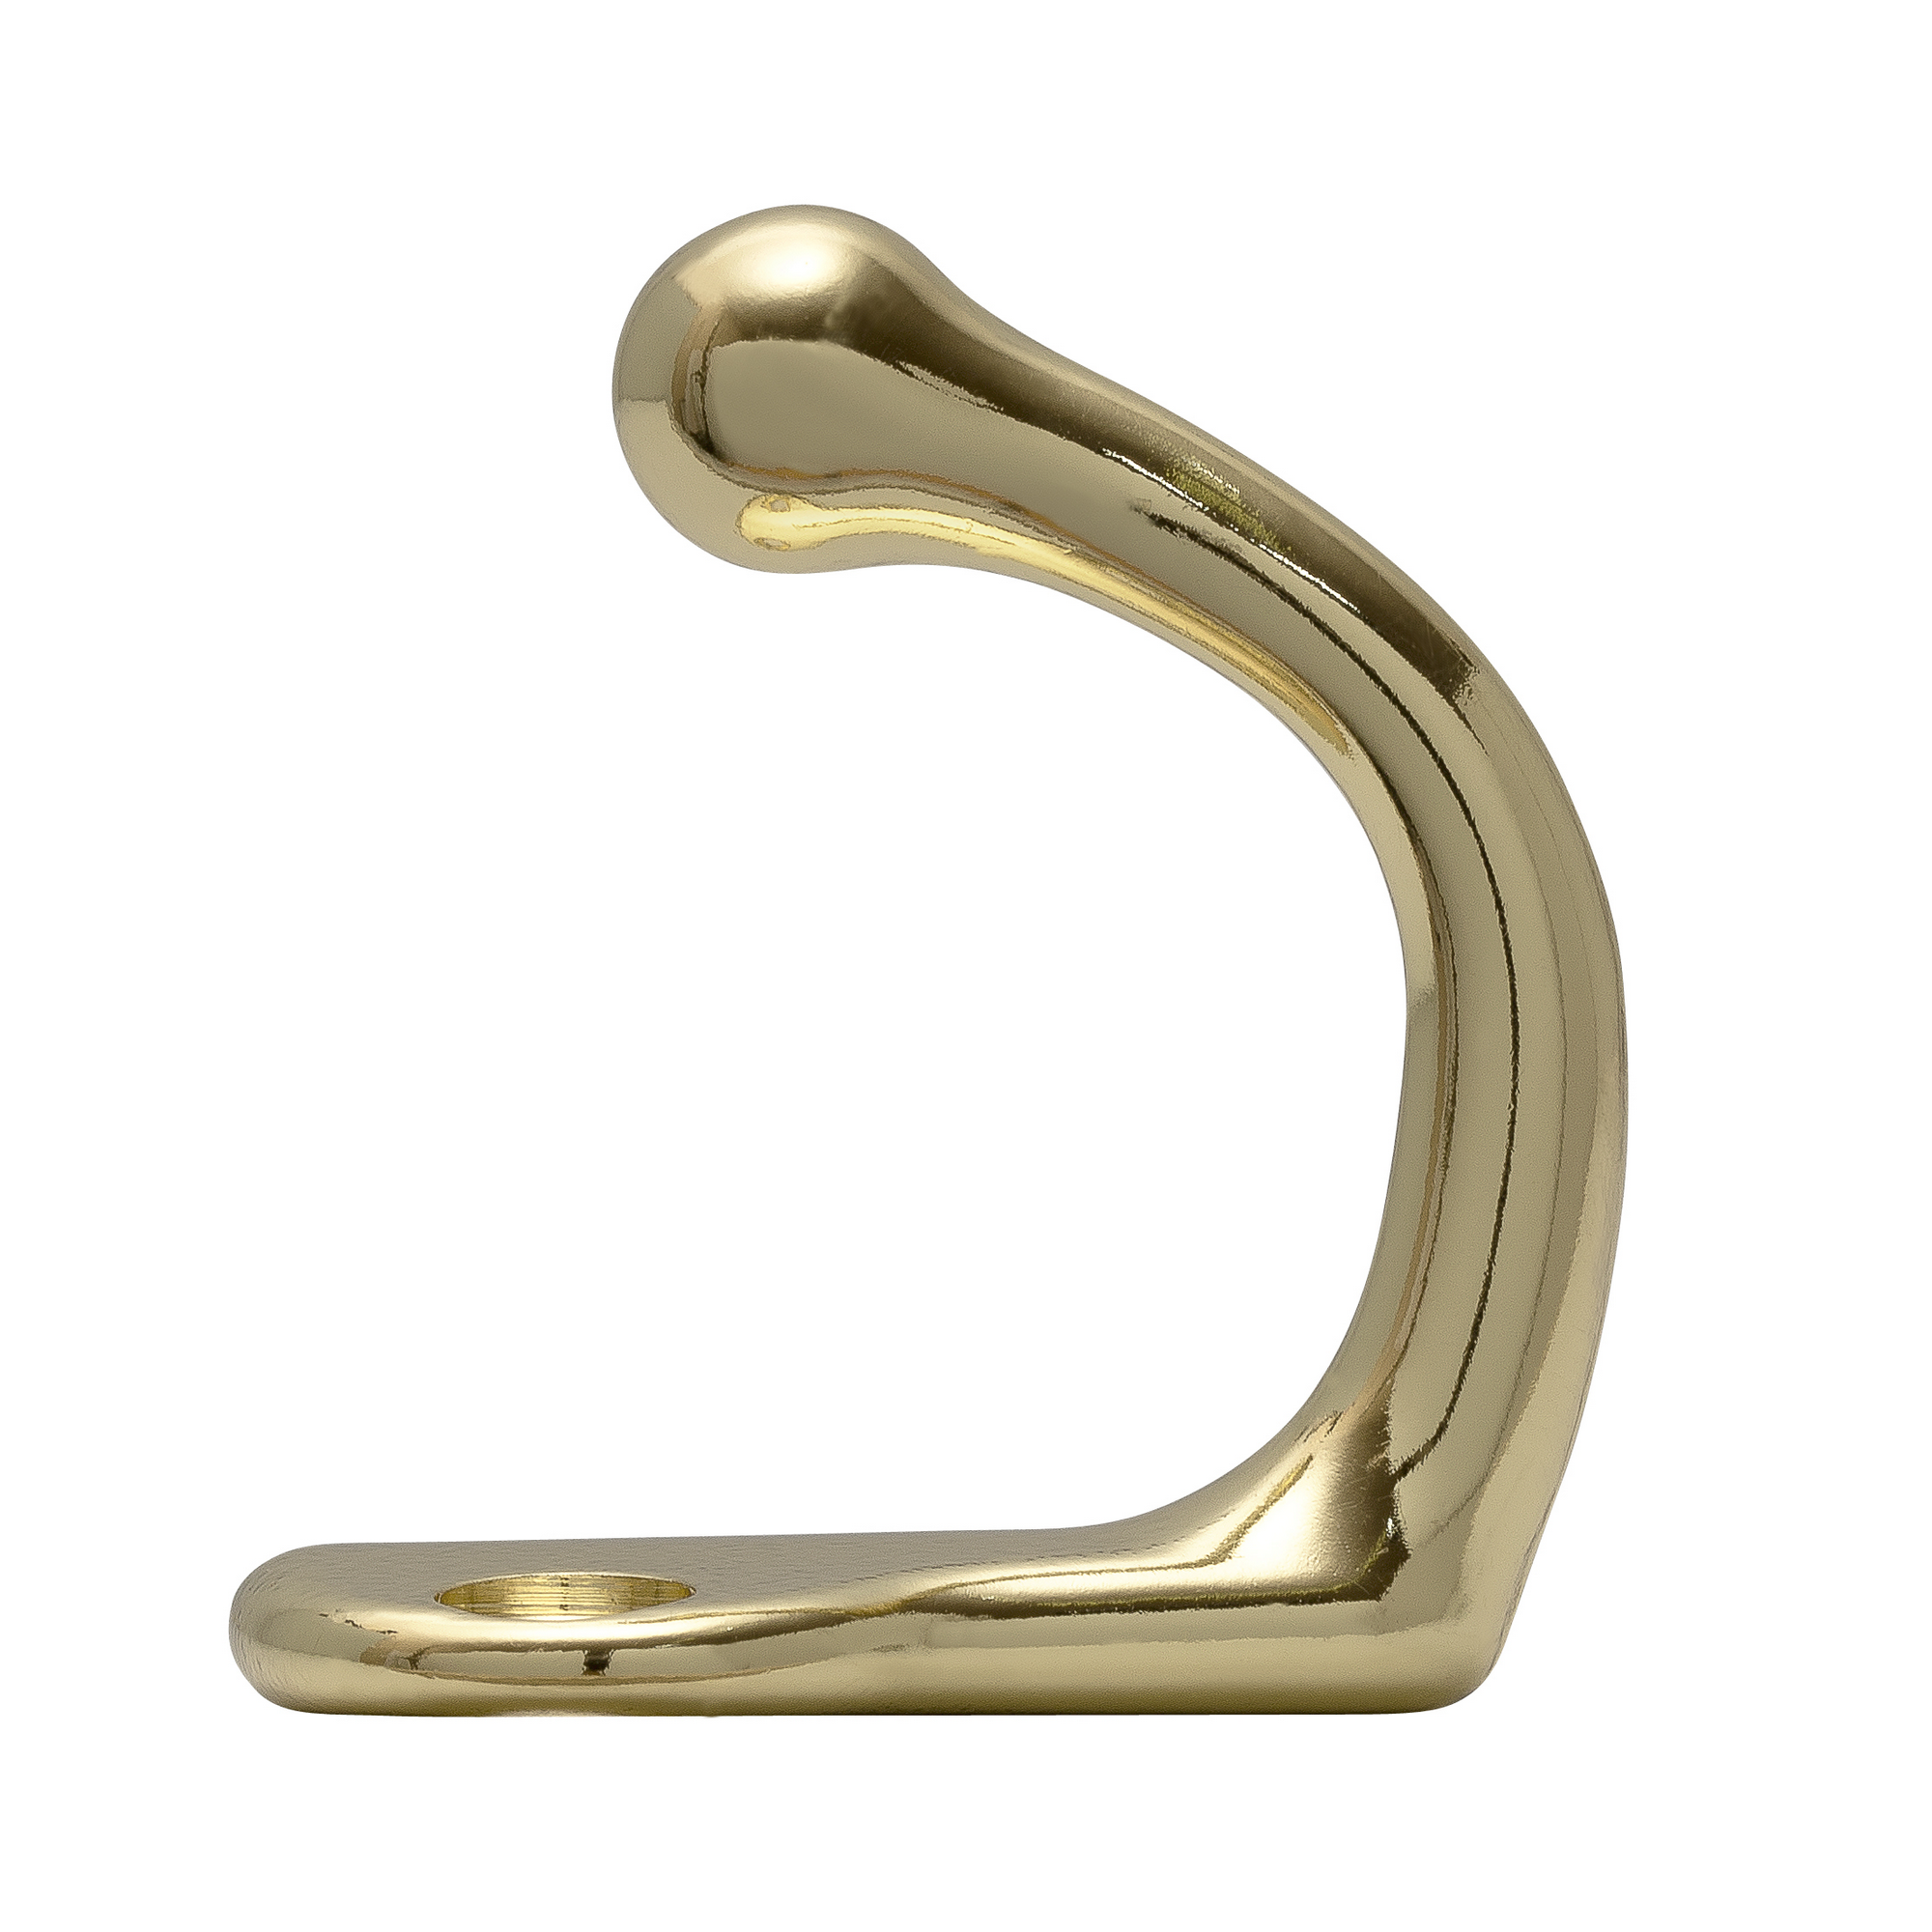 Eagle Claw 202-1 Gold Aberdeen Hook 100CT